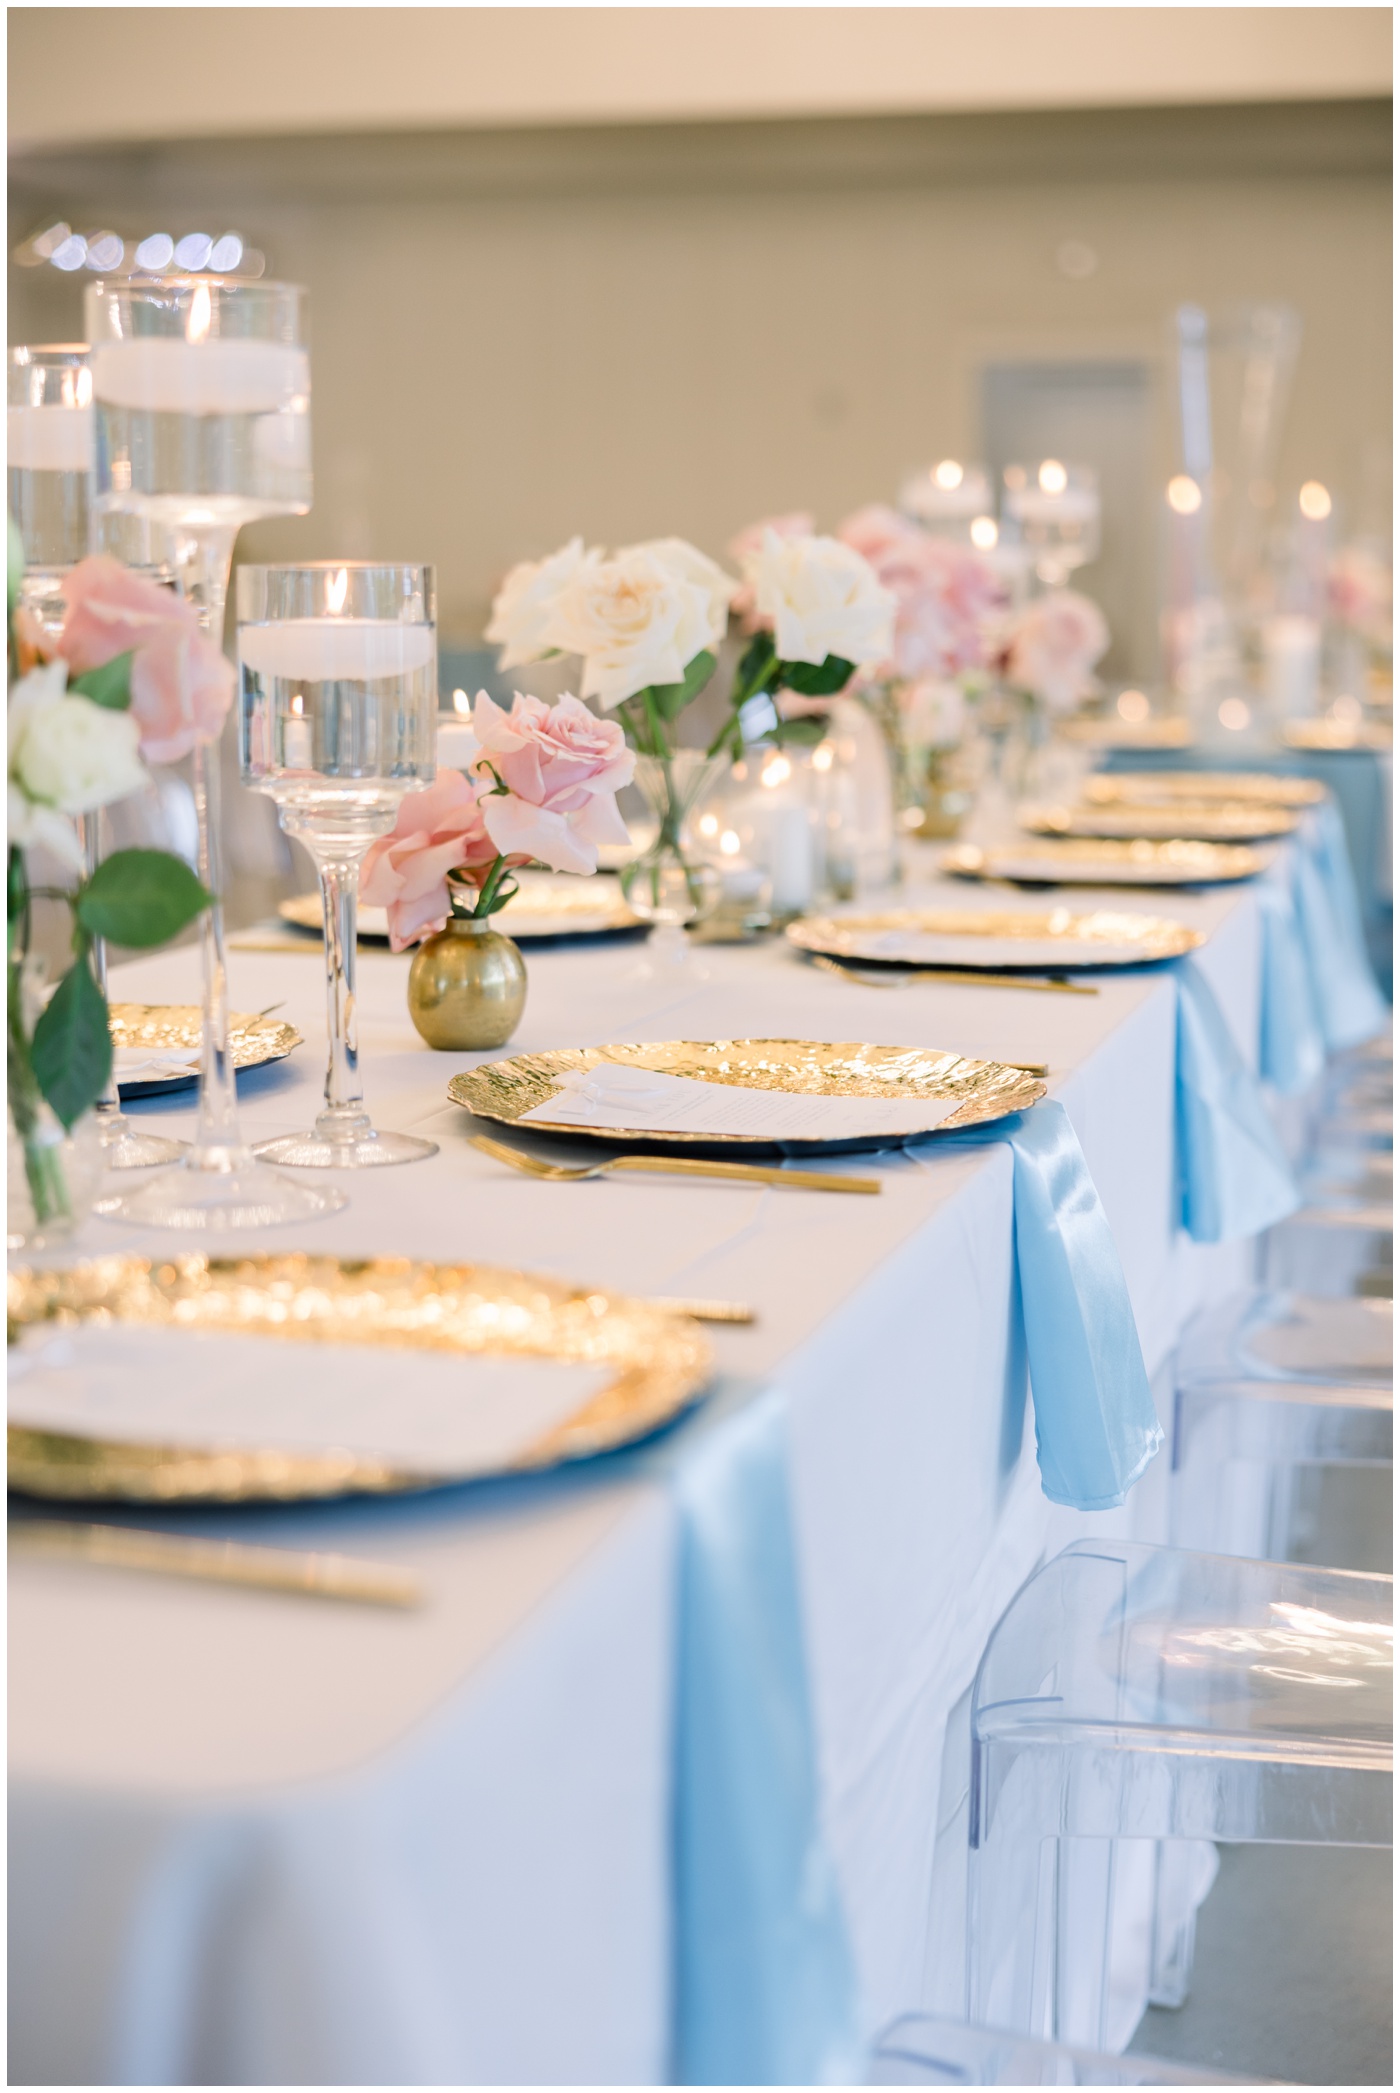 Reception details at the Peach Orchard